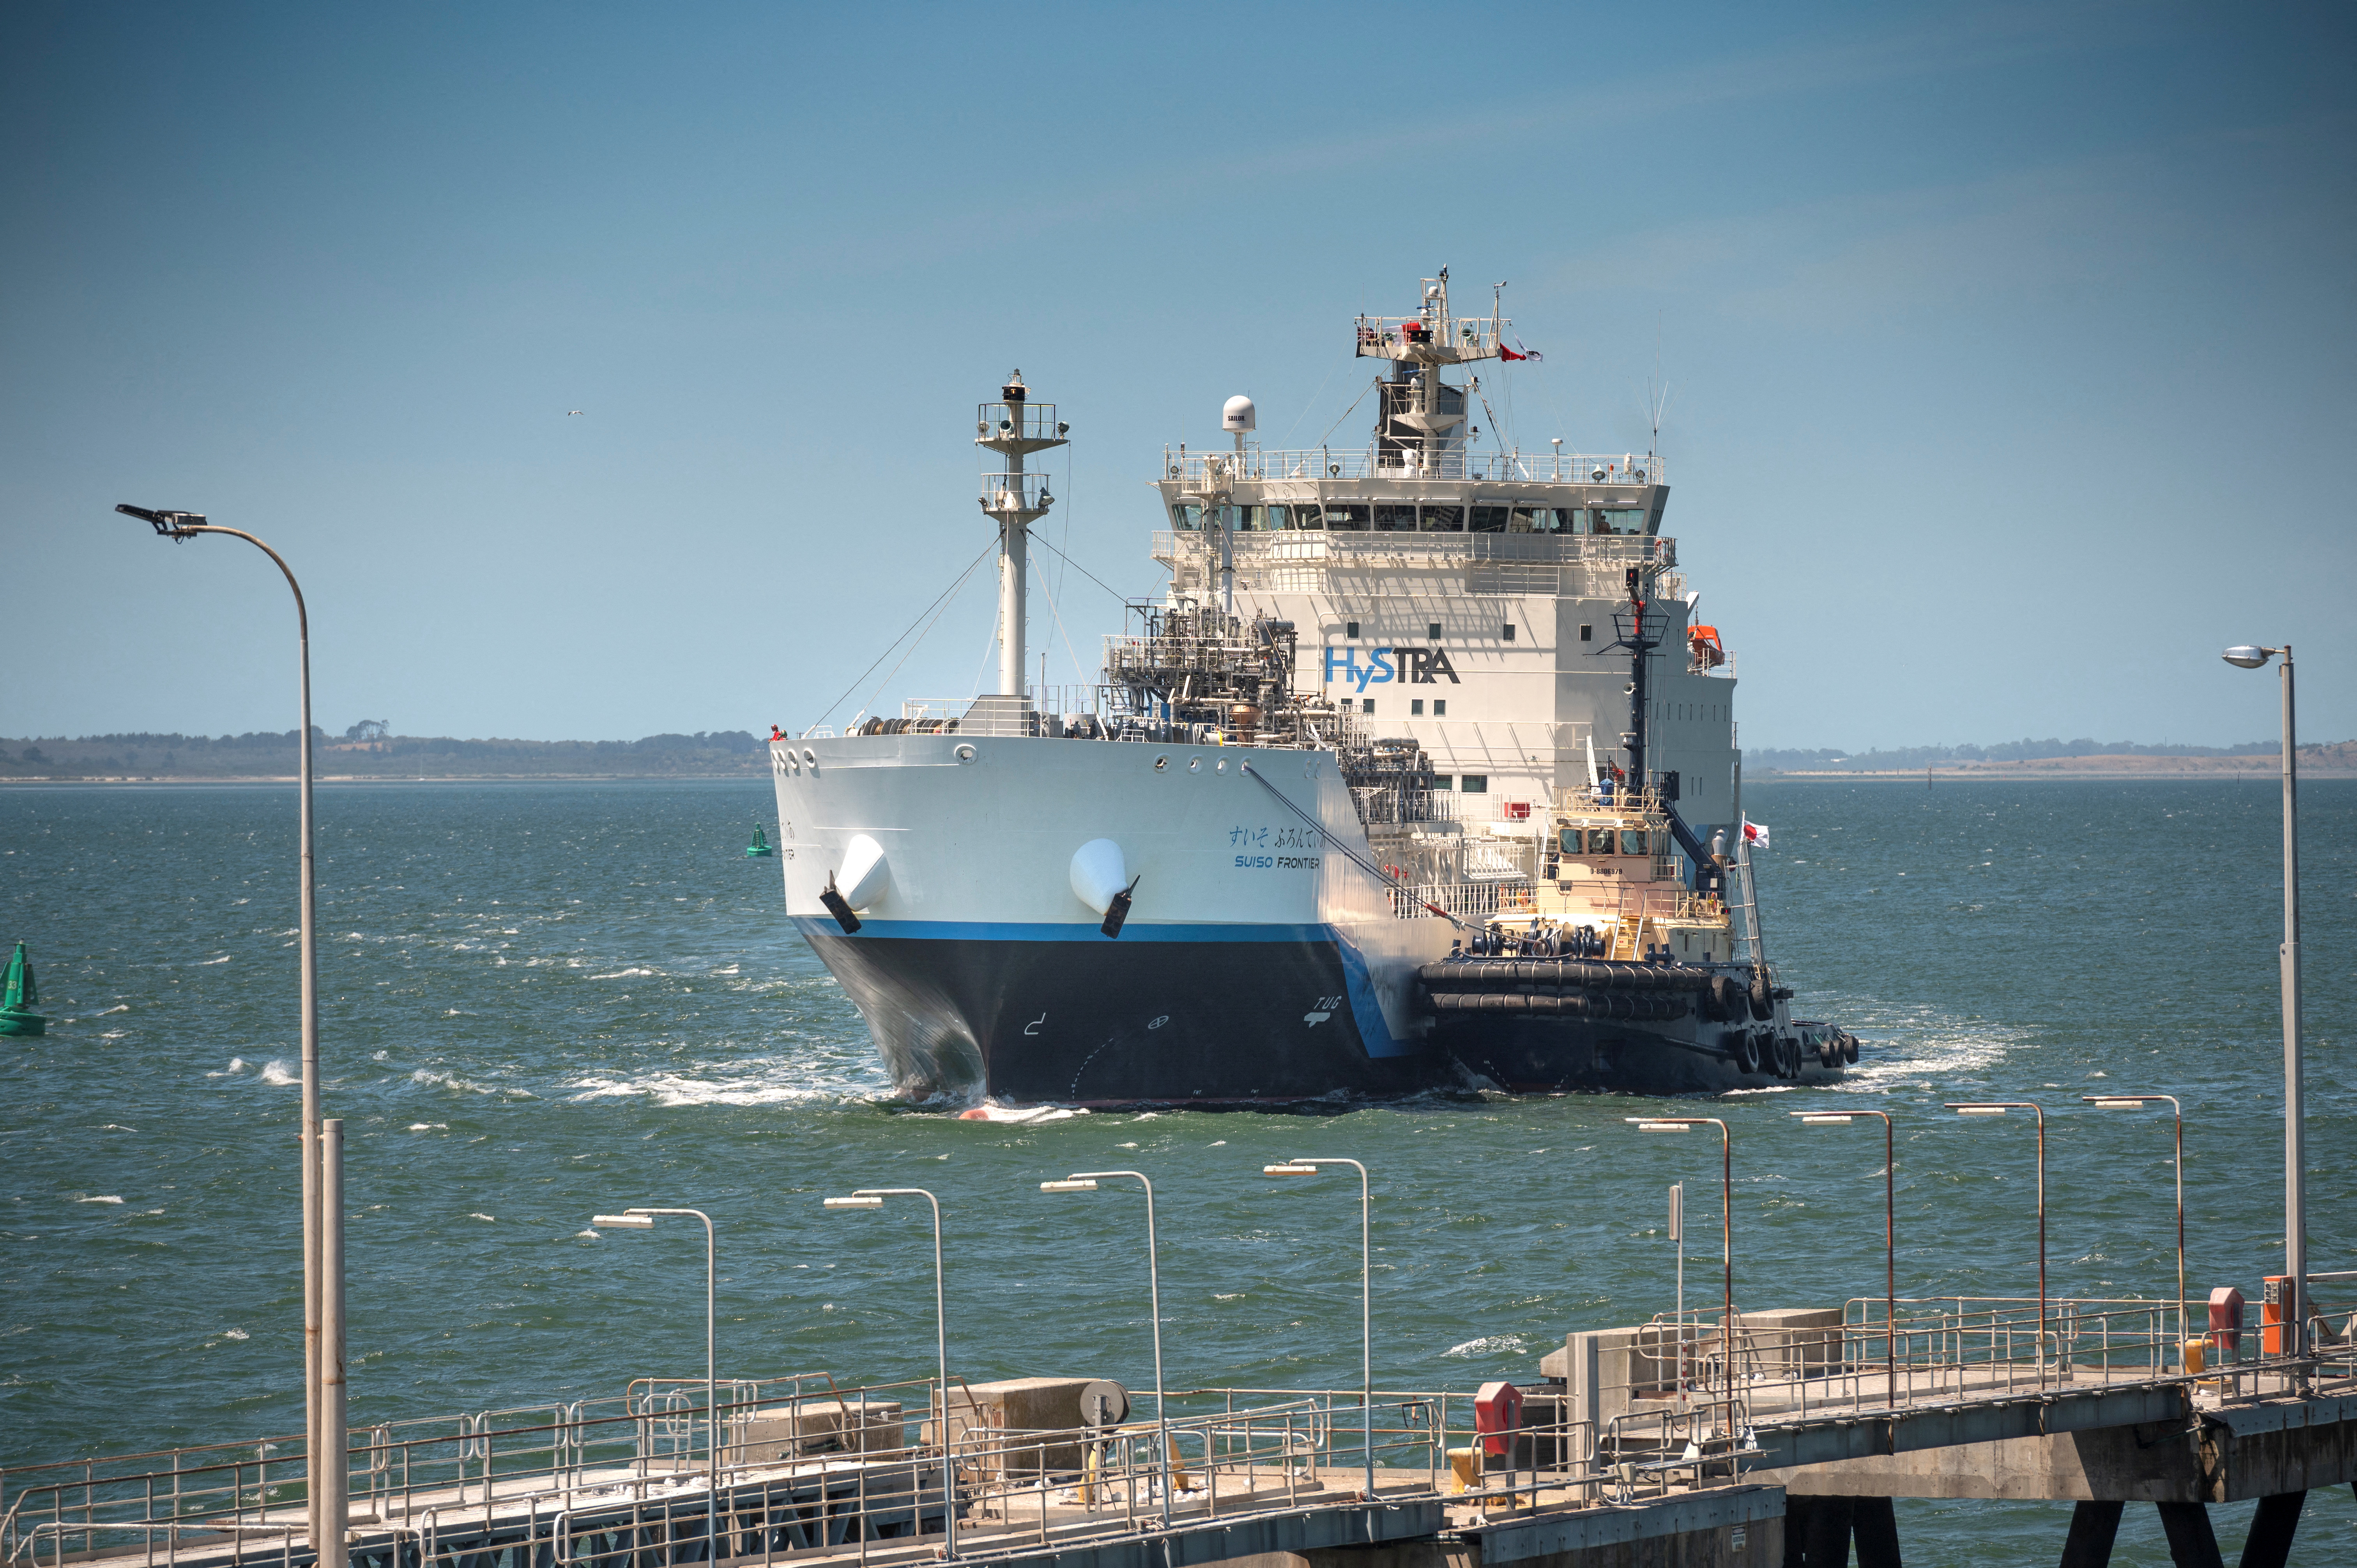 The Suiso Frontier, the world's first hydrogen carrier, built by Japan's Kawasaki Heavy Industries, is pictured upon its arrival from Kobe, Japan at the Port of Hastings in Victoria, Australia January 20, 2022. Courtesy HySTRA/Handout via REUTERS 